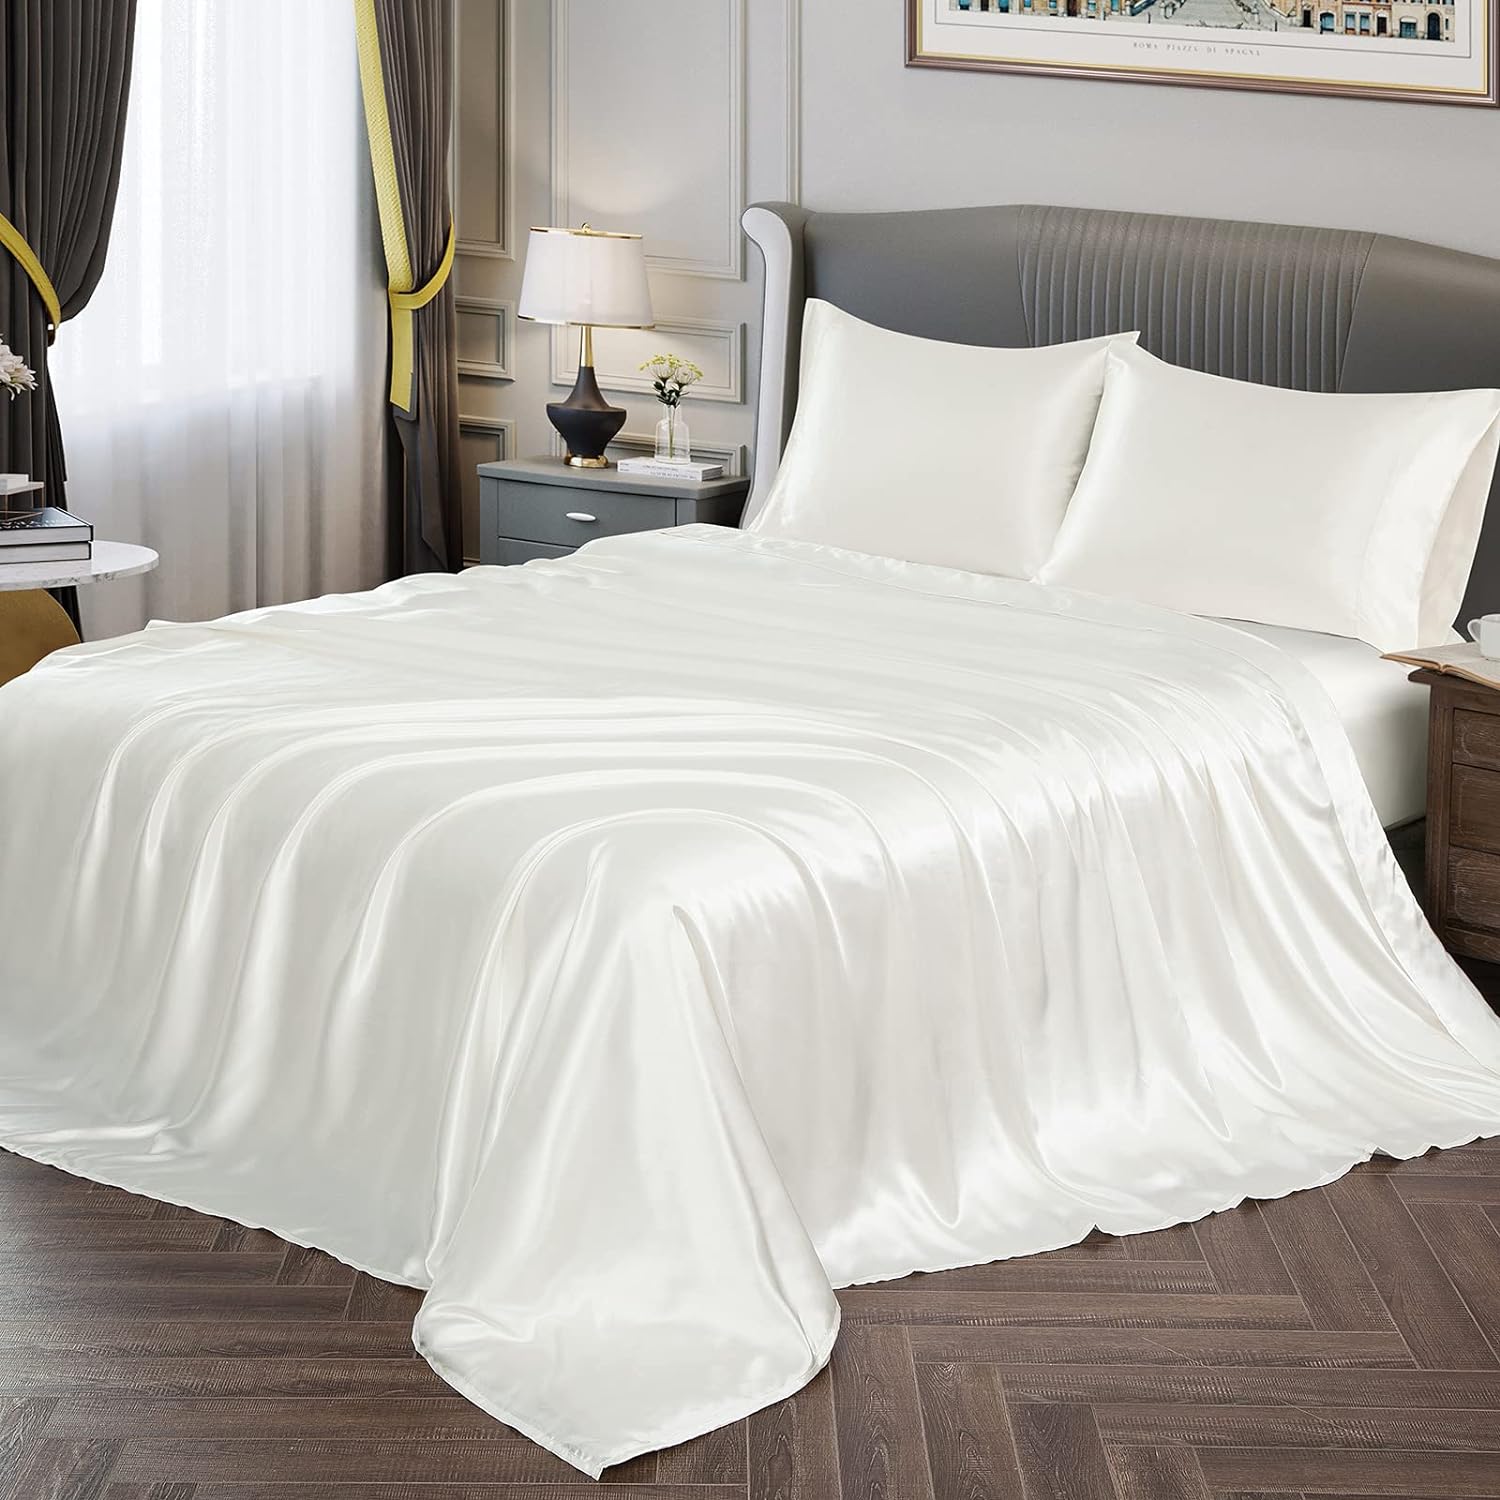 Vonty Satin Sheets Full Size Silky Soft Satin Bed Sheets Review Bed Sheets 5298